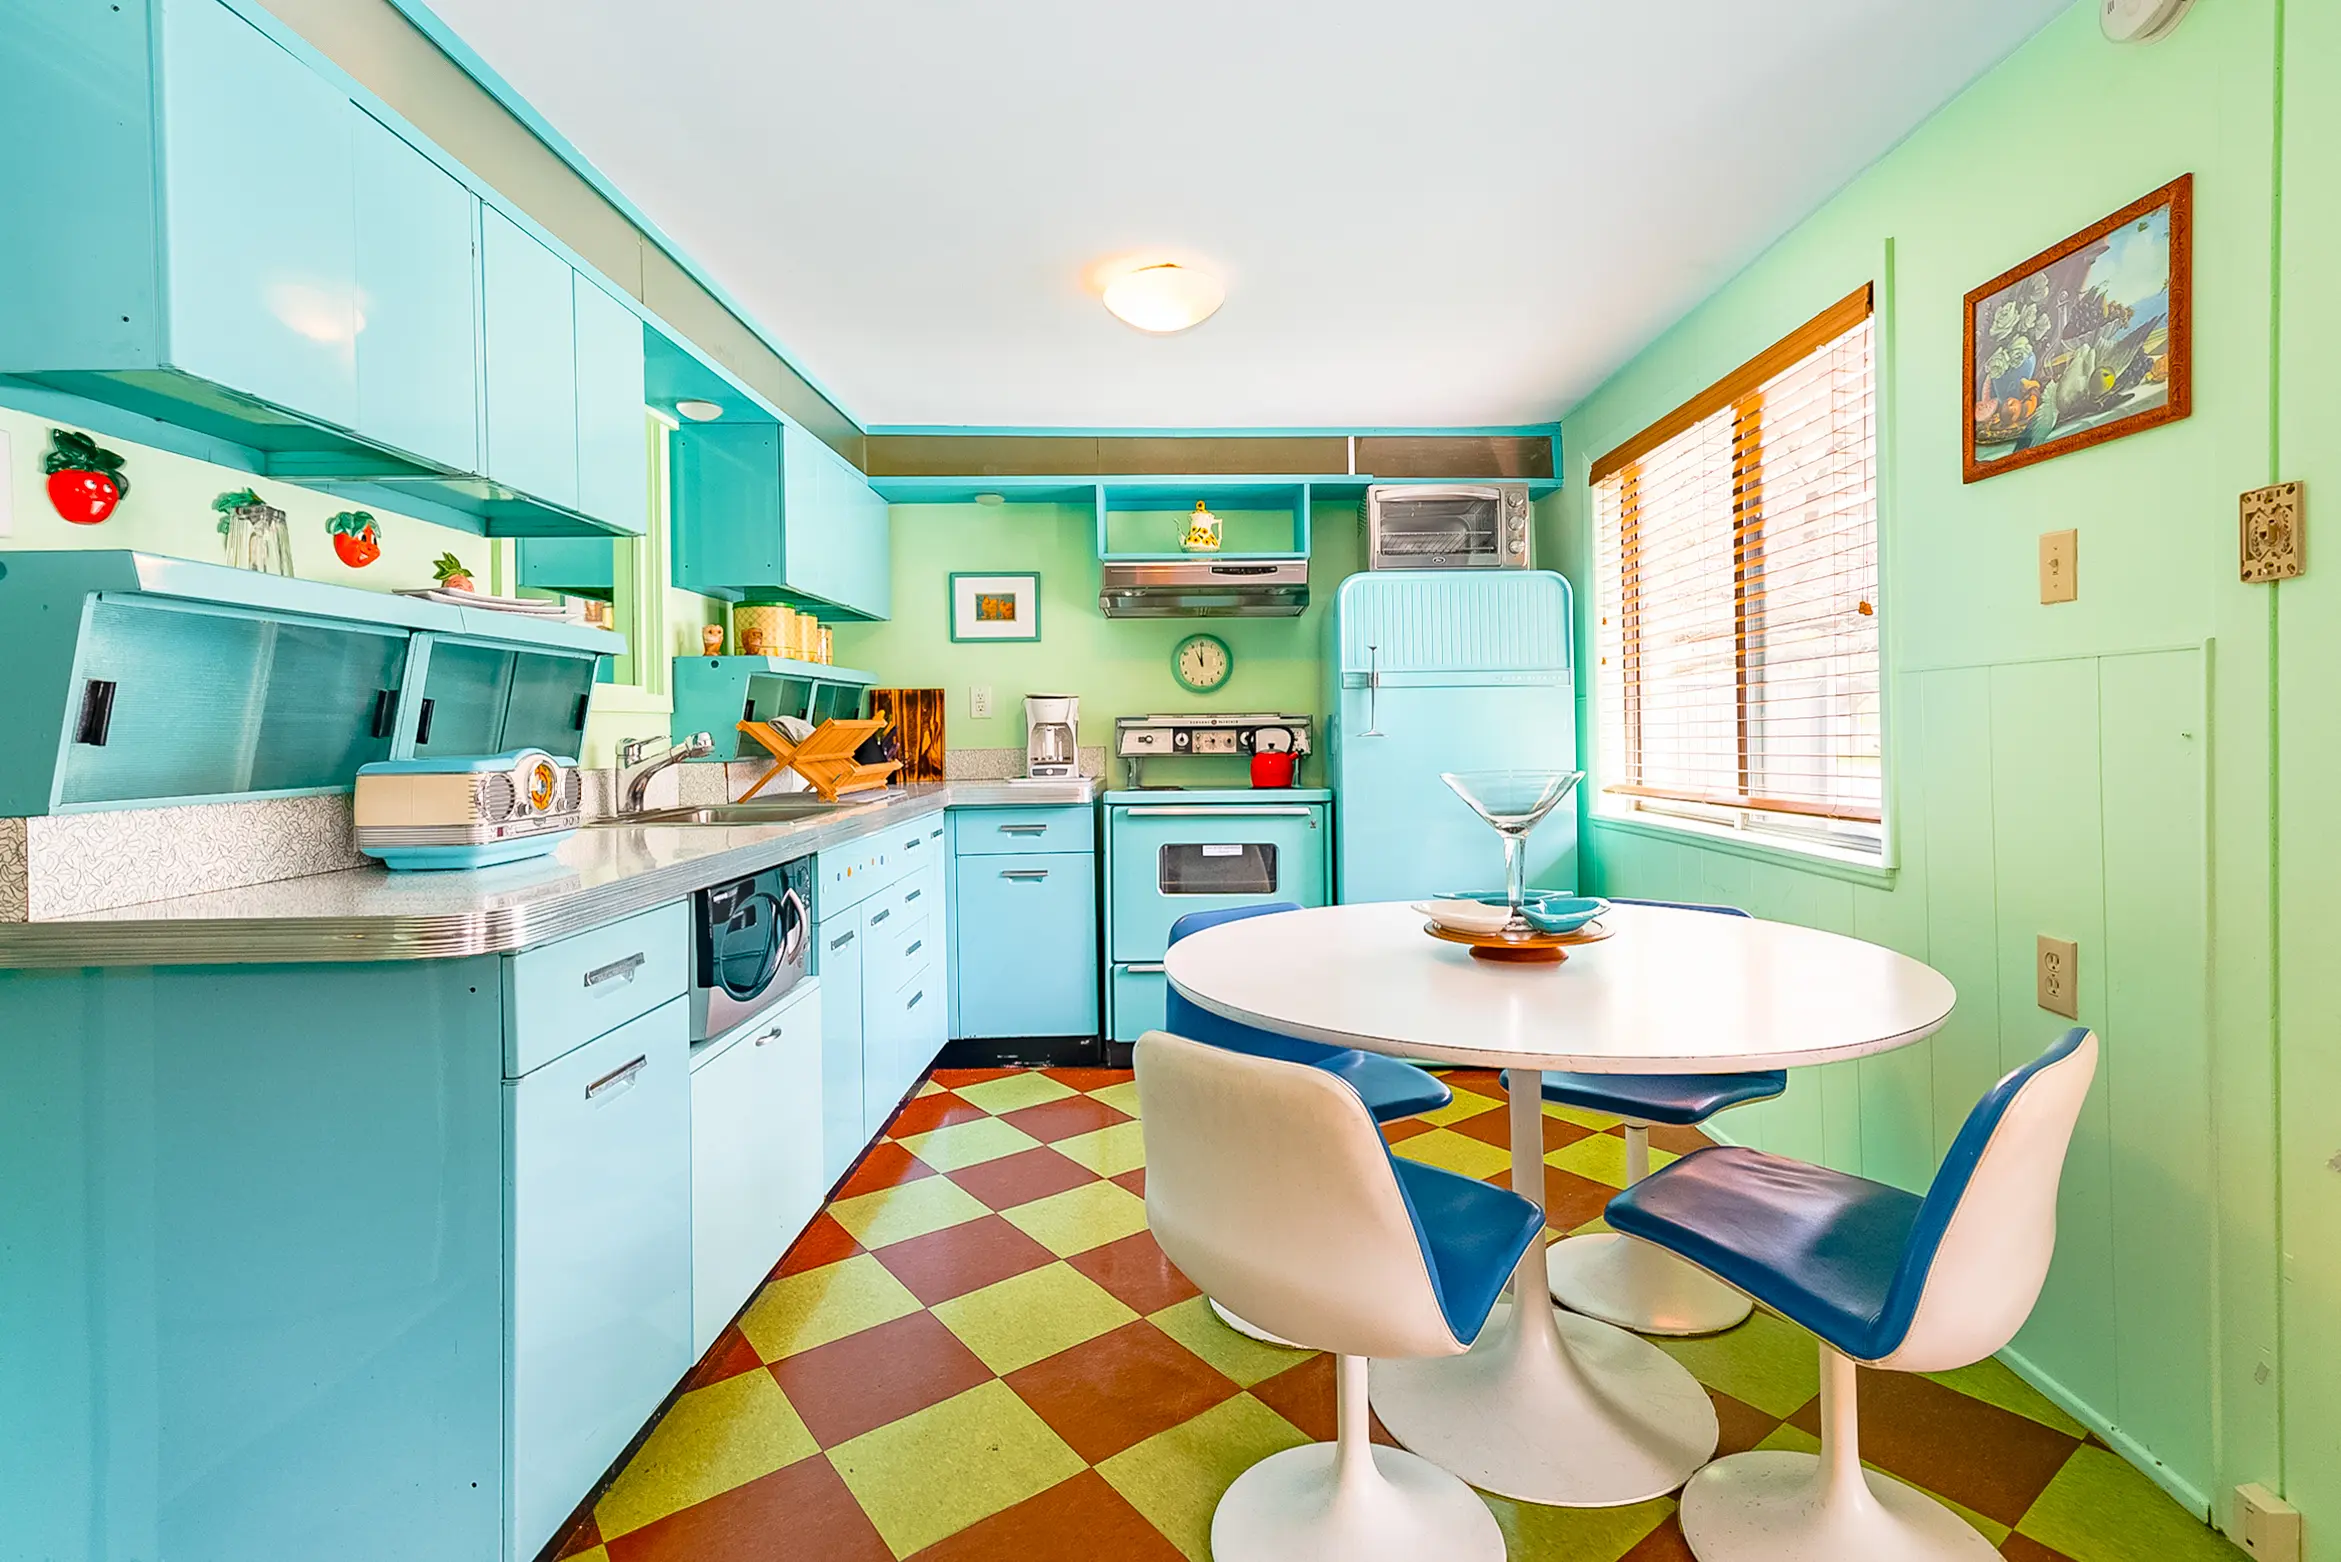 Kate Pierson of the B-52s lists her retro Catskills compound for $2.2M ...